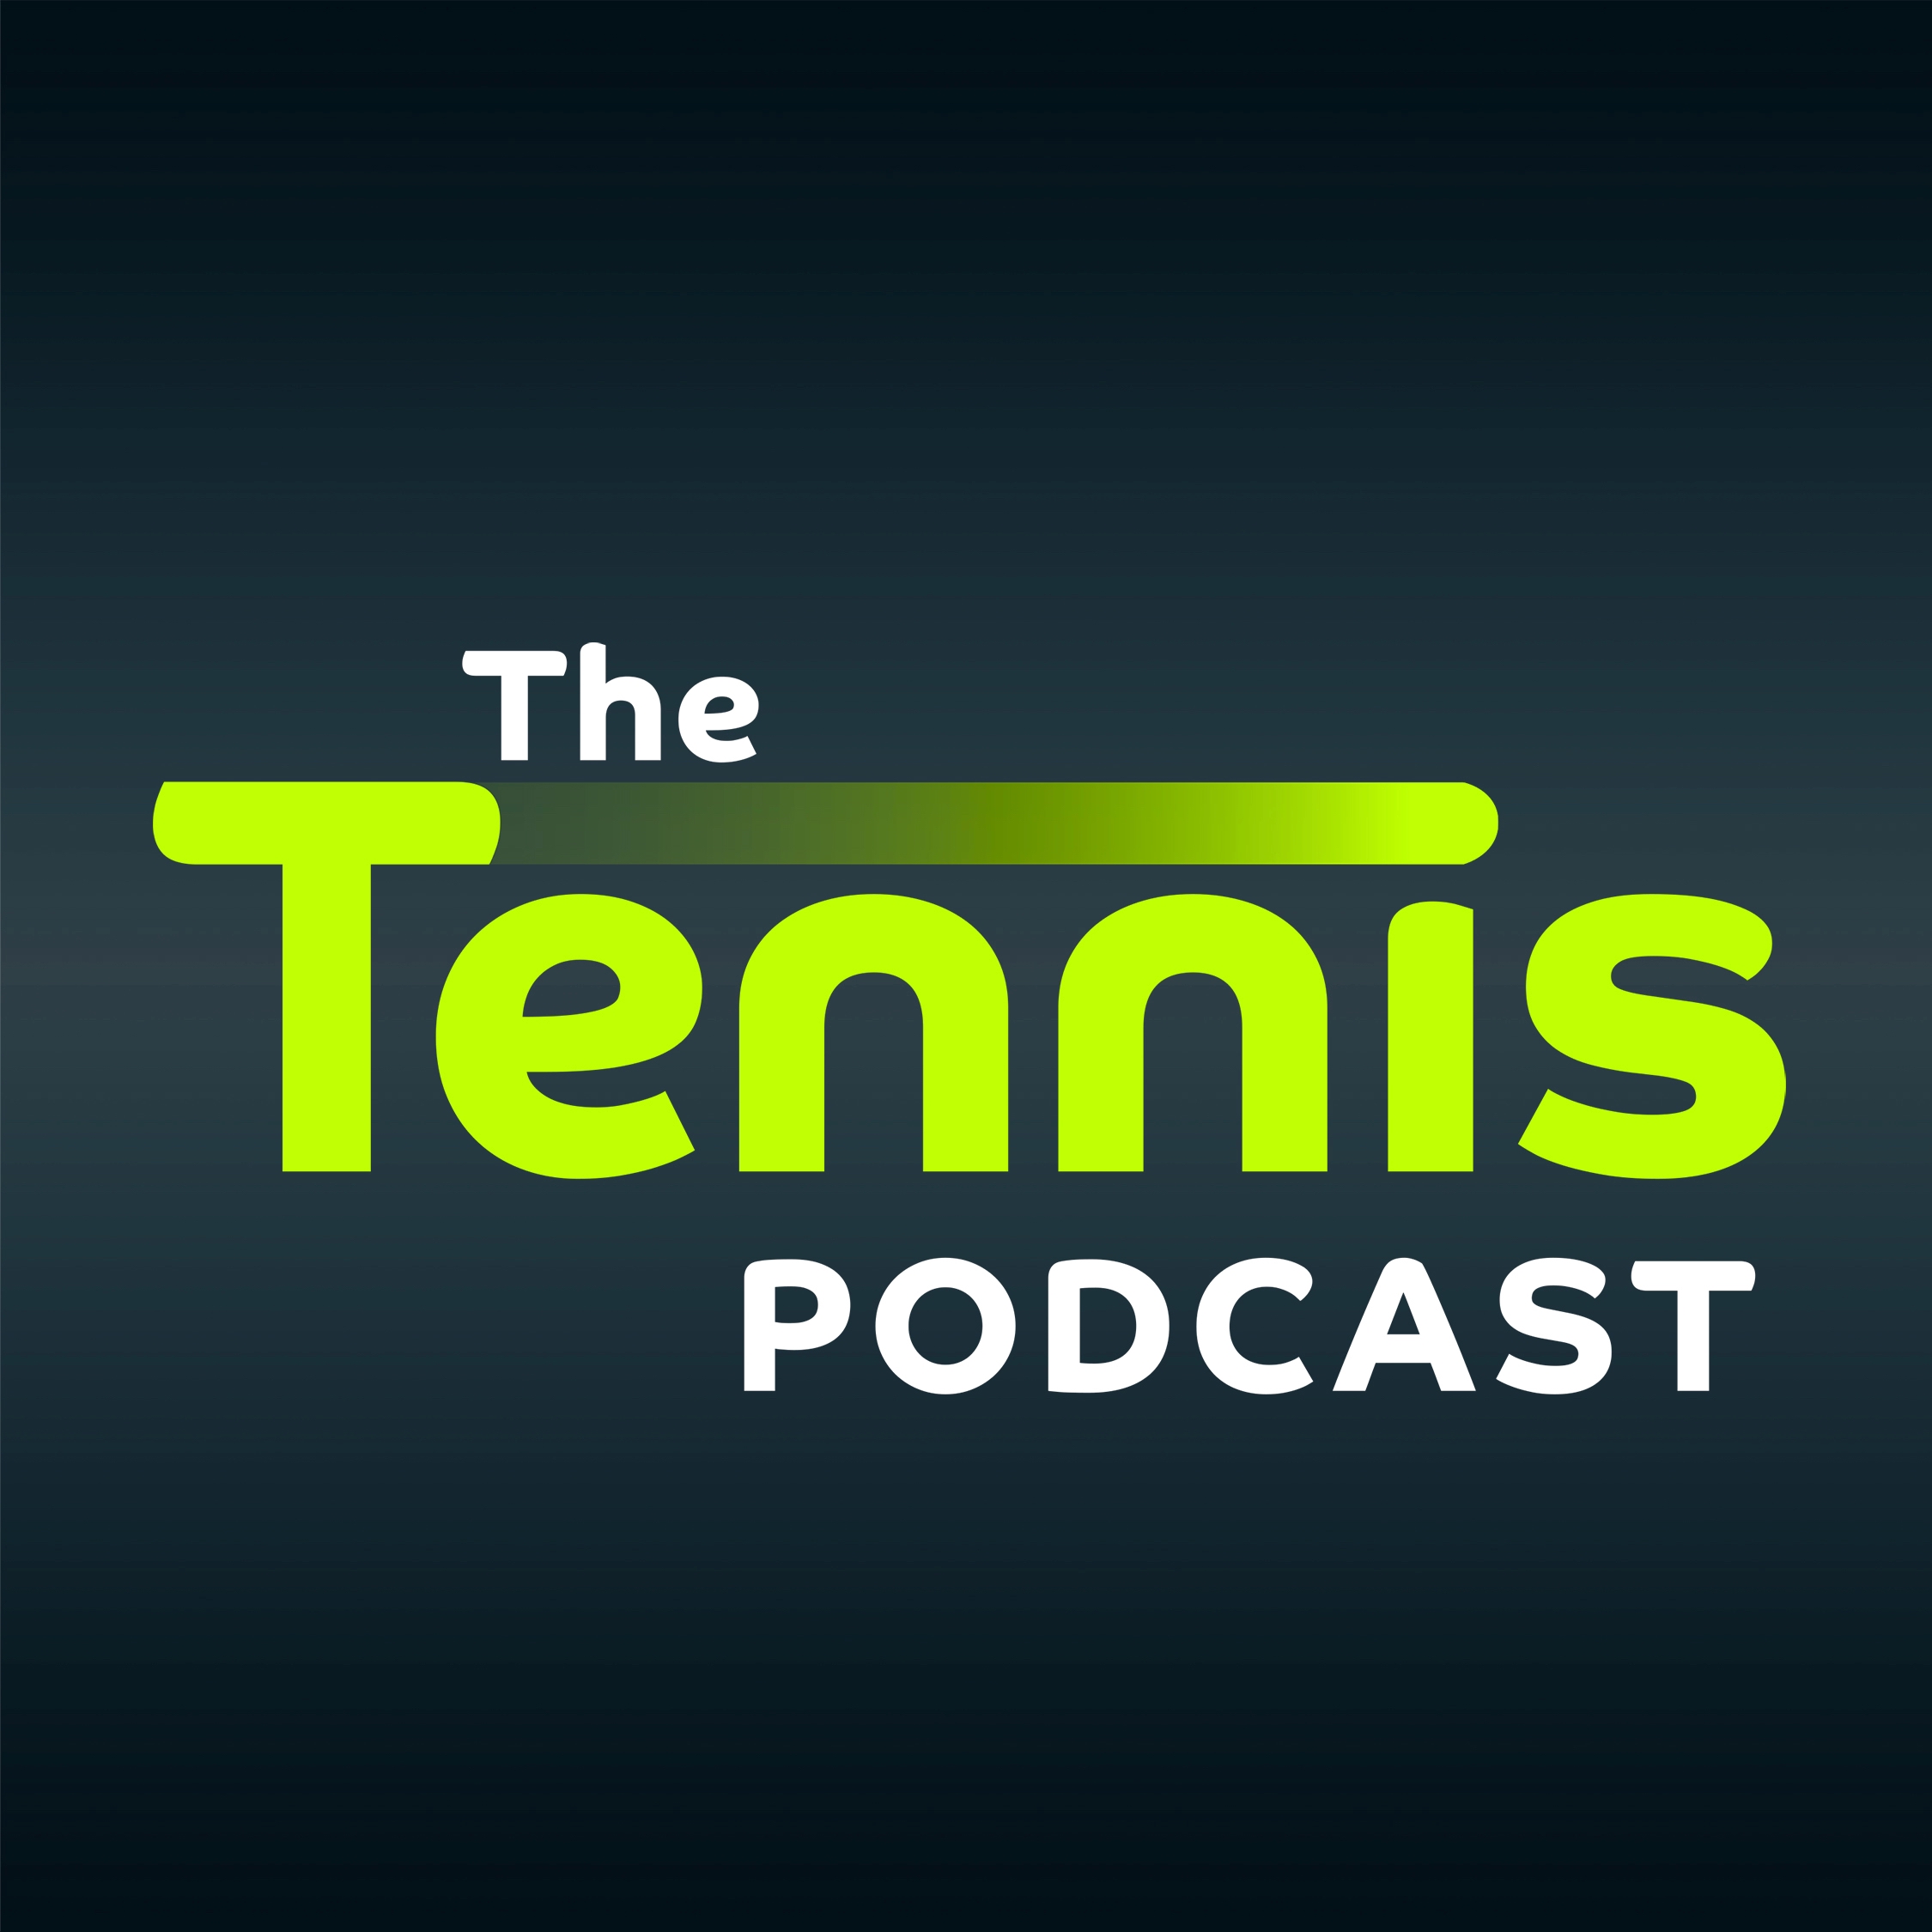 The Tennis Podcast image